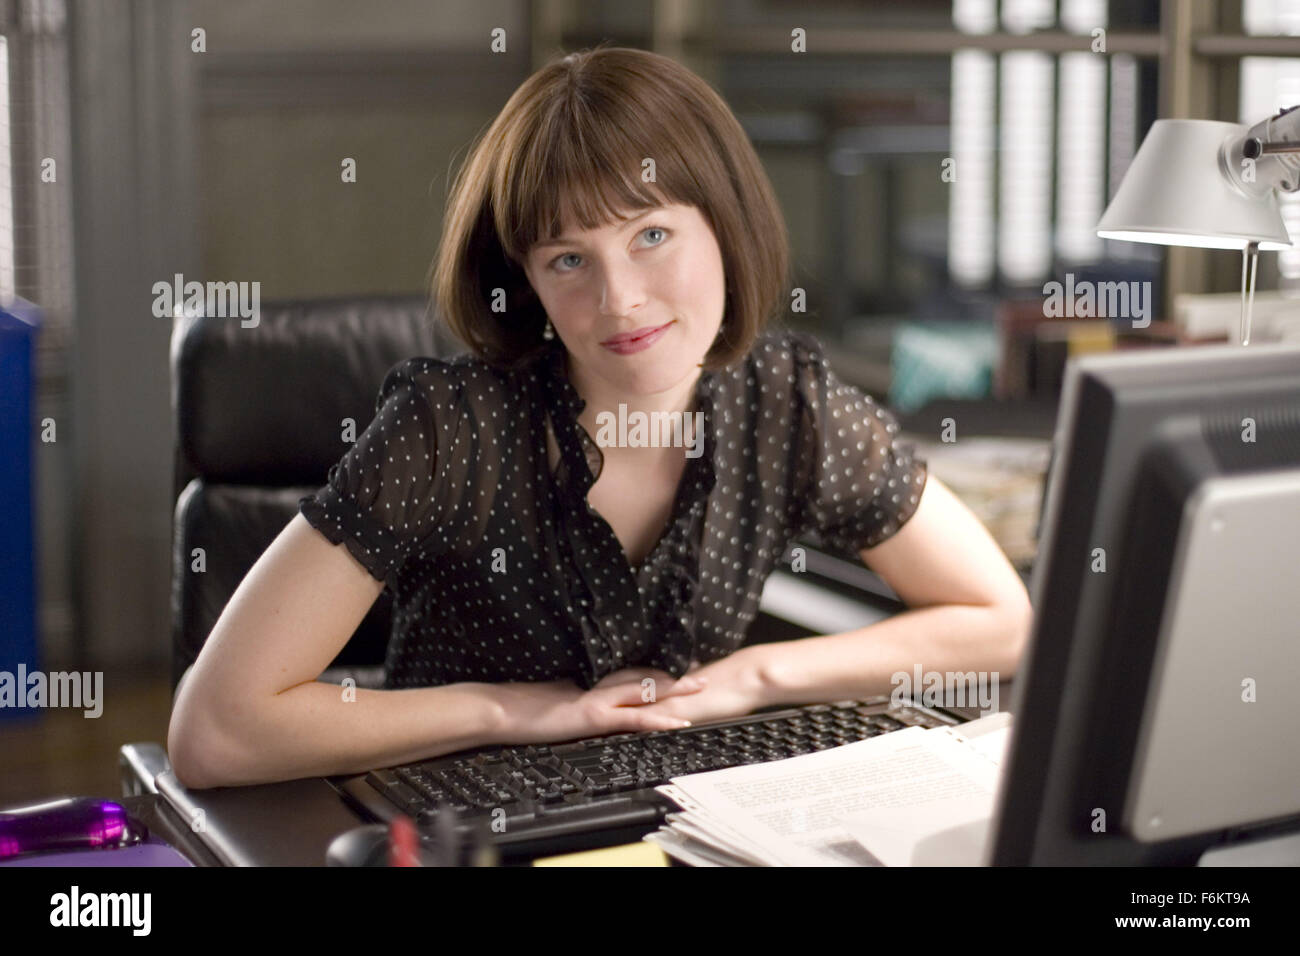 RELEASE DATE: May 4, 2007. MOVIE TITLE: Spider-Man 3 - STUDIO: Columbia Pictures/Sony Pictures Entertainment. PLOT: A strange black entity from another world bonds with Peter Parker and causes inner turmoil as he contends with new villains, temptations, and revenge. PICTURED: ELIZABETH BANKS as Betty Brant. Stock Photo